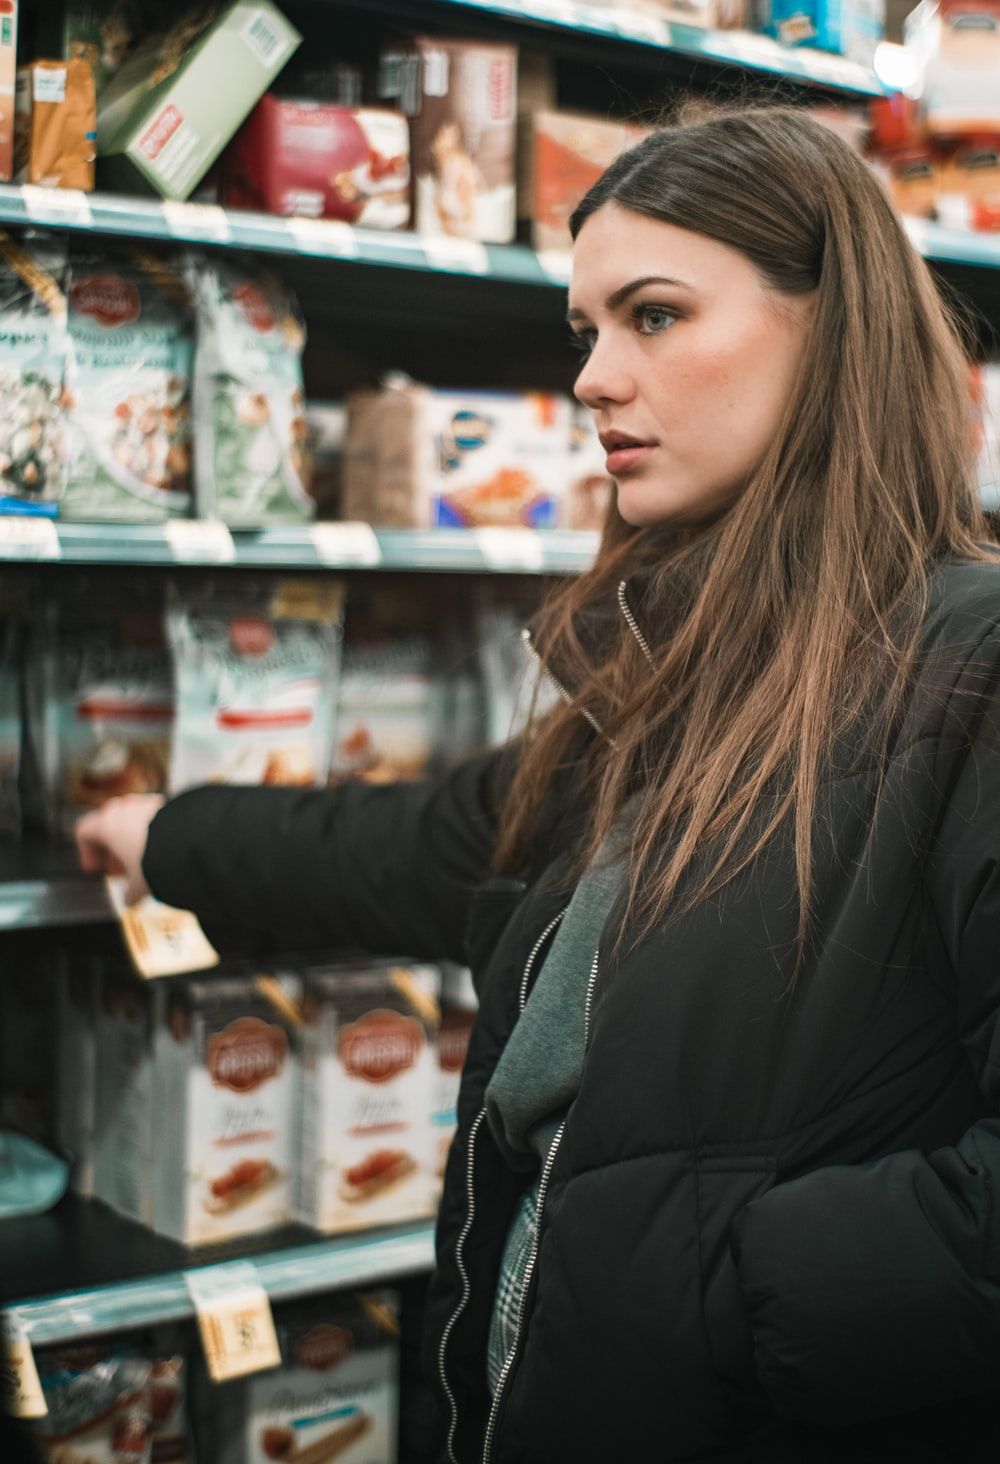 Woman Supermarket Picture. Download Free Image